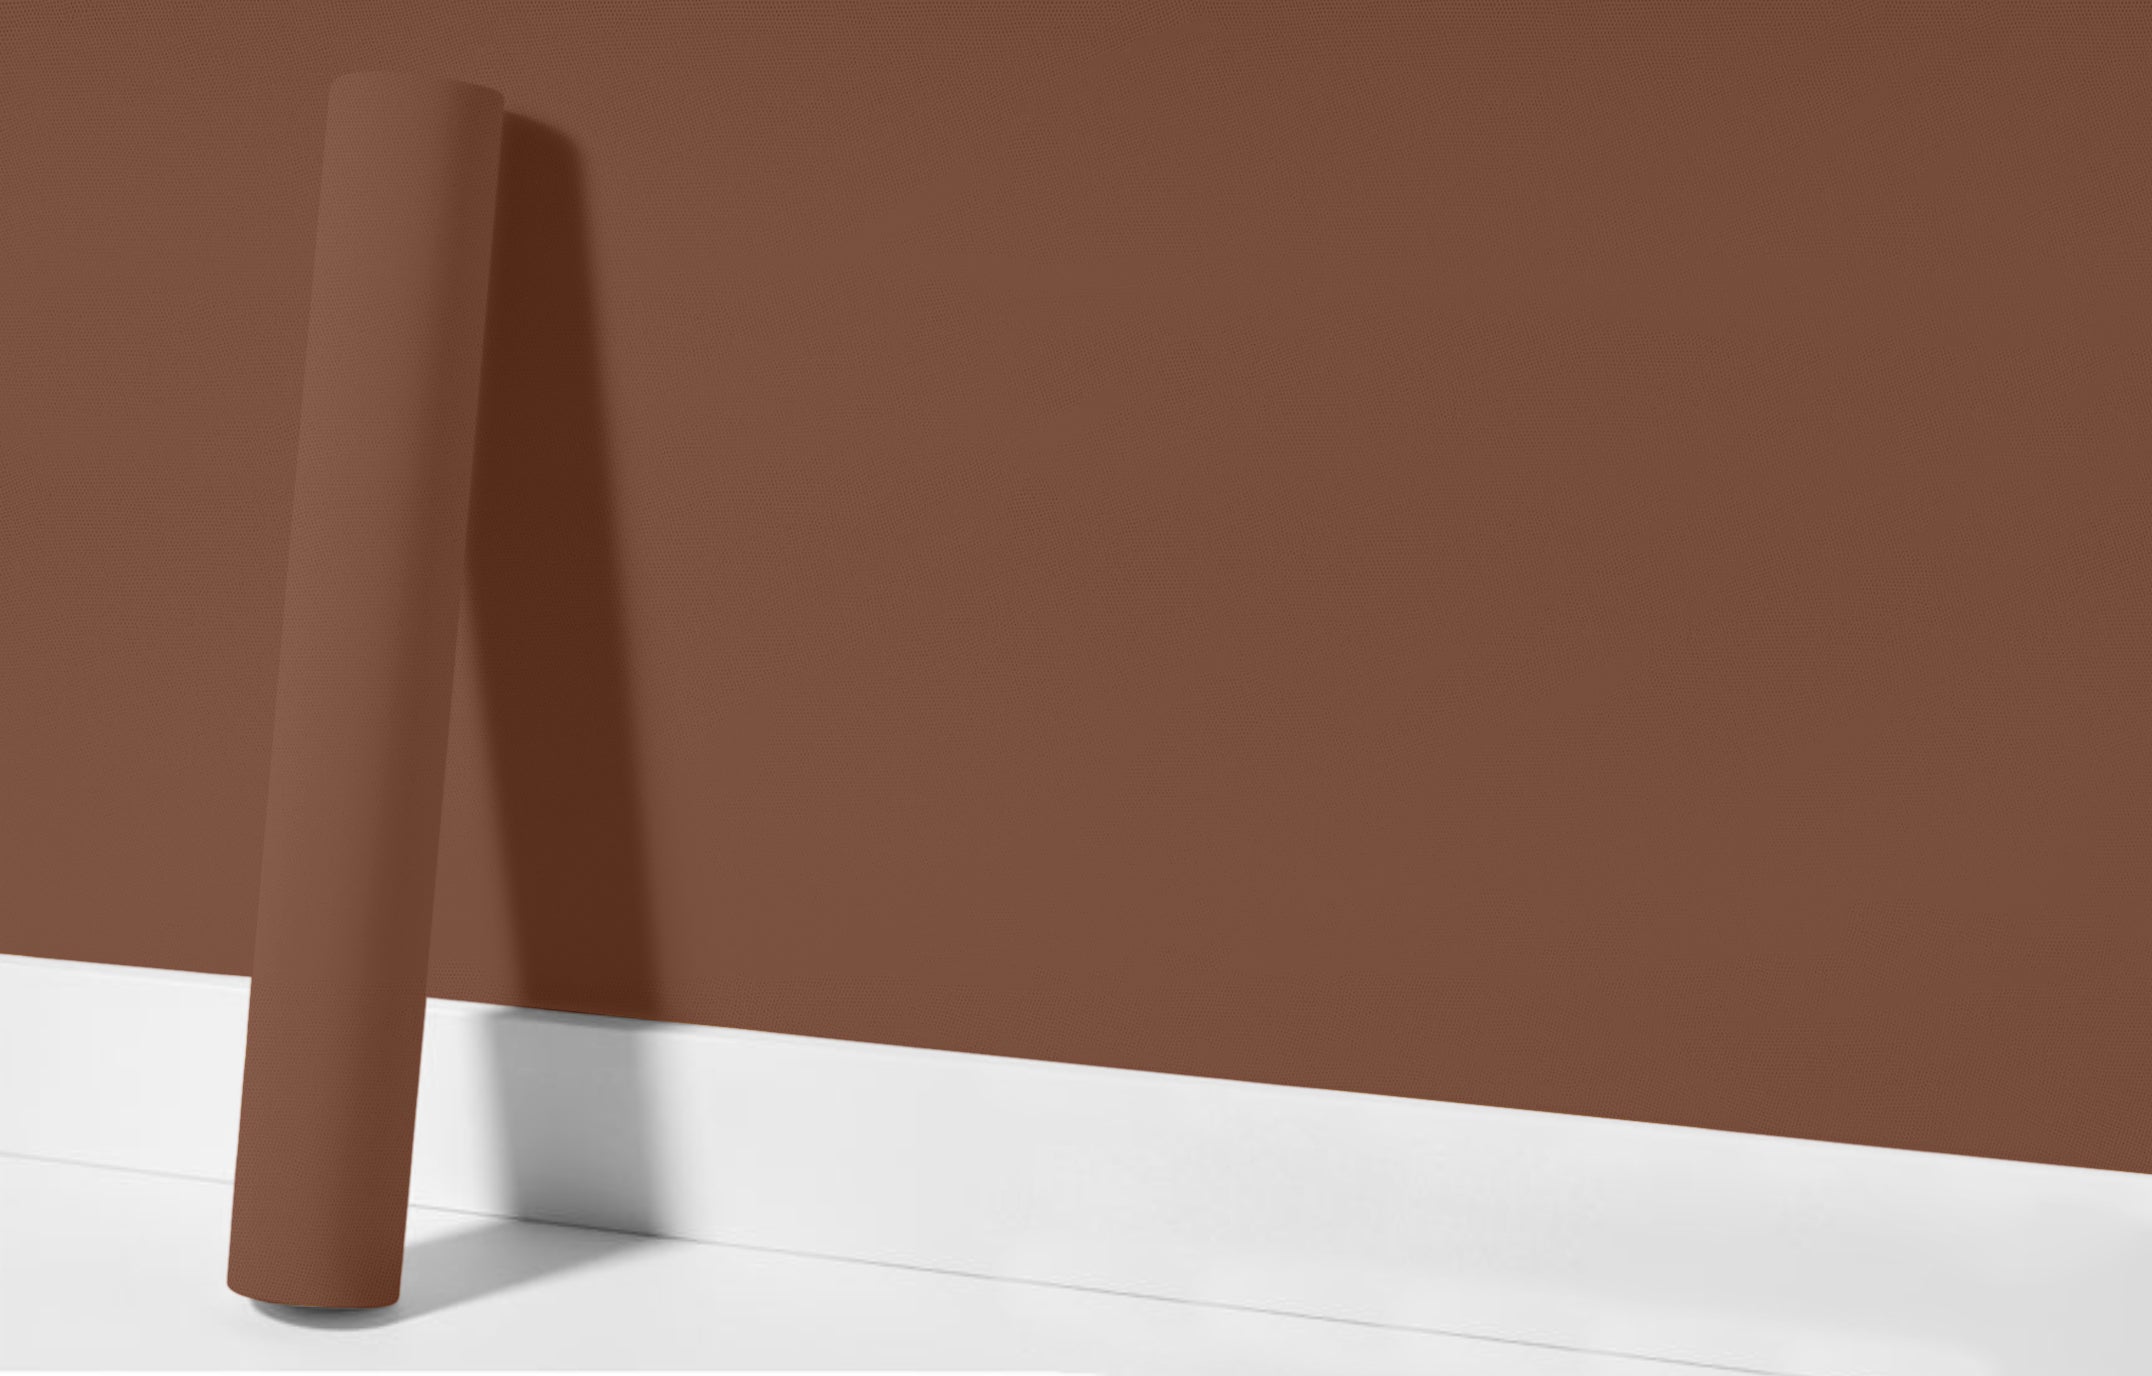 Peel & Stick Removable Re-usable Paint - Color RAL 8002 Signal Brown - offRAL™ - RALRAW LLC, USA